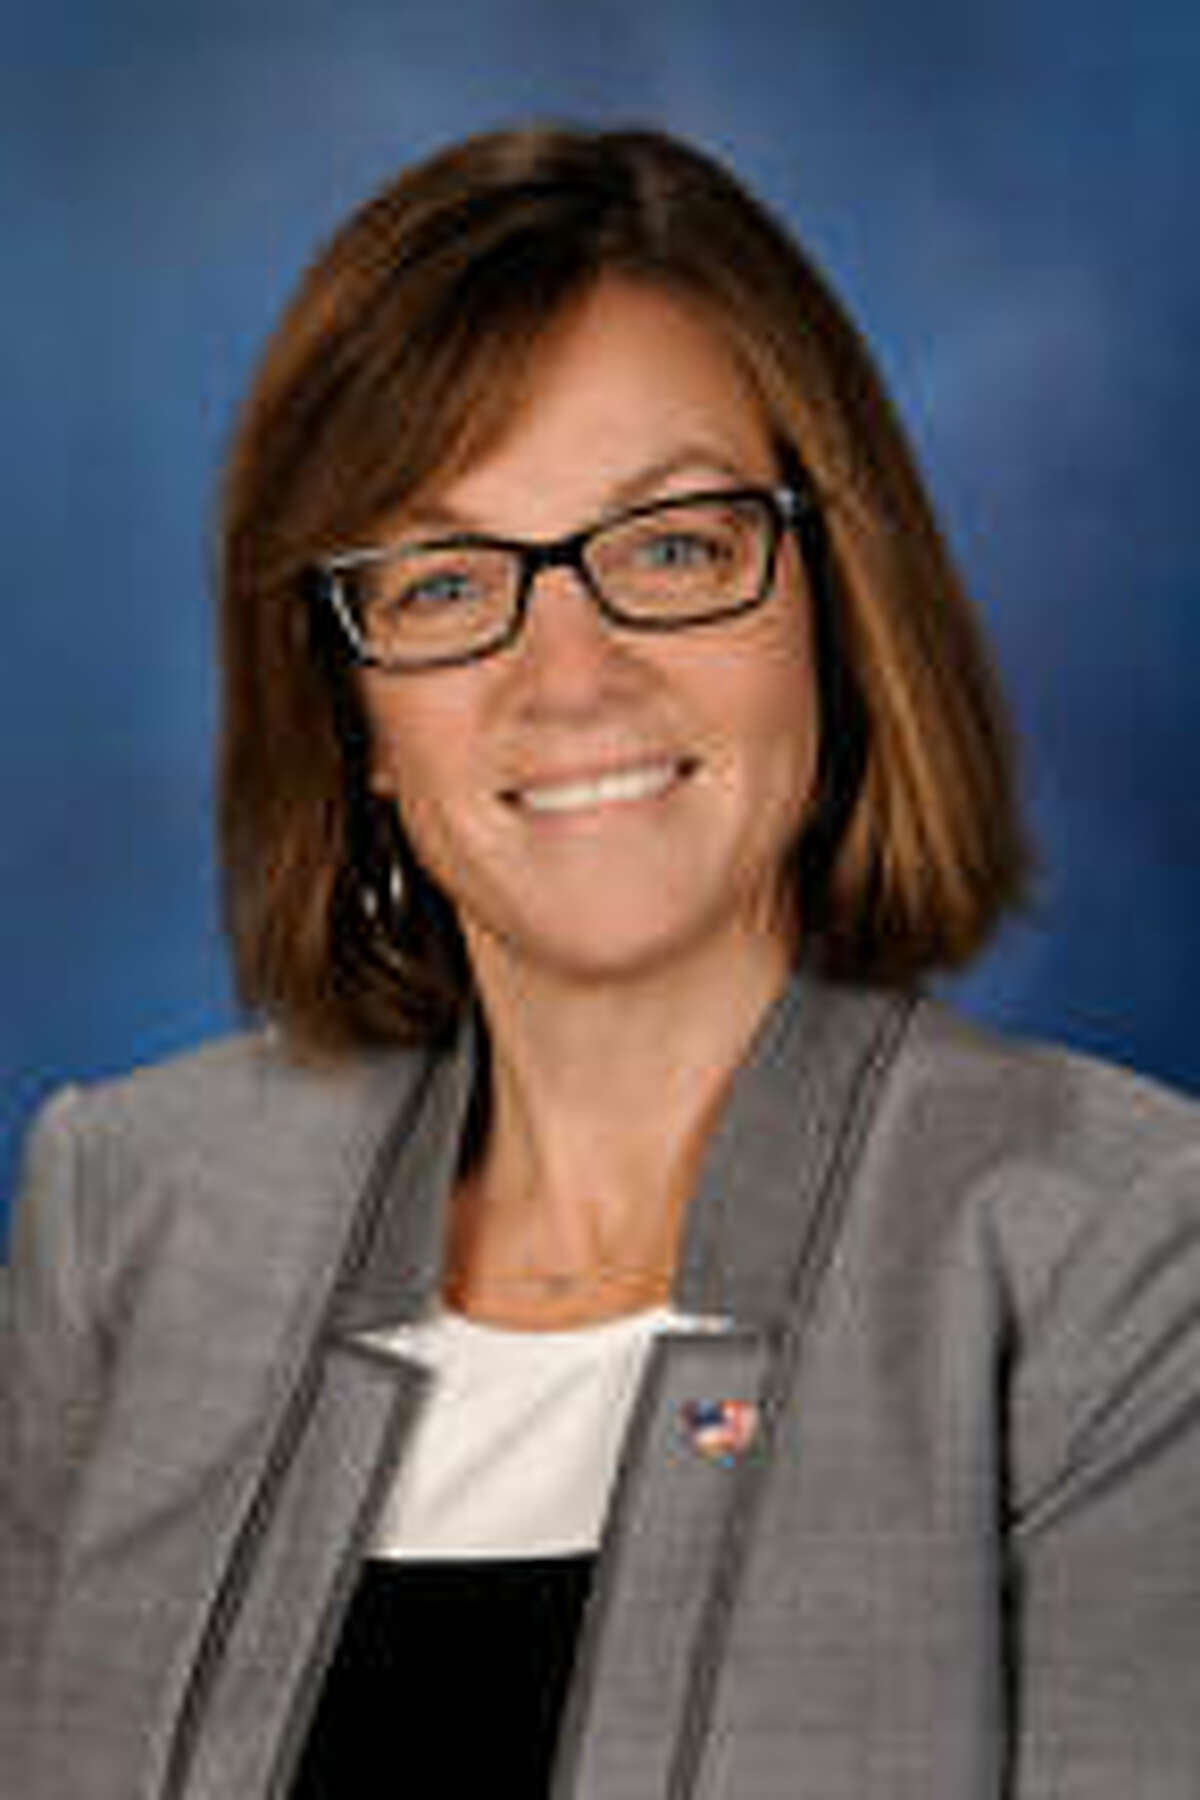 State Rep. Katie Stuart, D-Edwardsville, on Monday said she had no role in changes by the Illinois Senate to her legislation, House Bill 163, that she introduced in December. Stuart’s bill initially dealt with opioid tracking; an amendment to her bill last week replaced the language with a 600-page amendment that local law enforcement officials from both parties have said is dangerous.